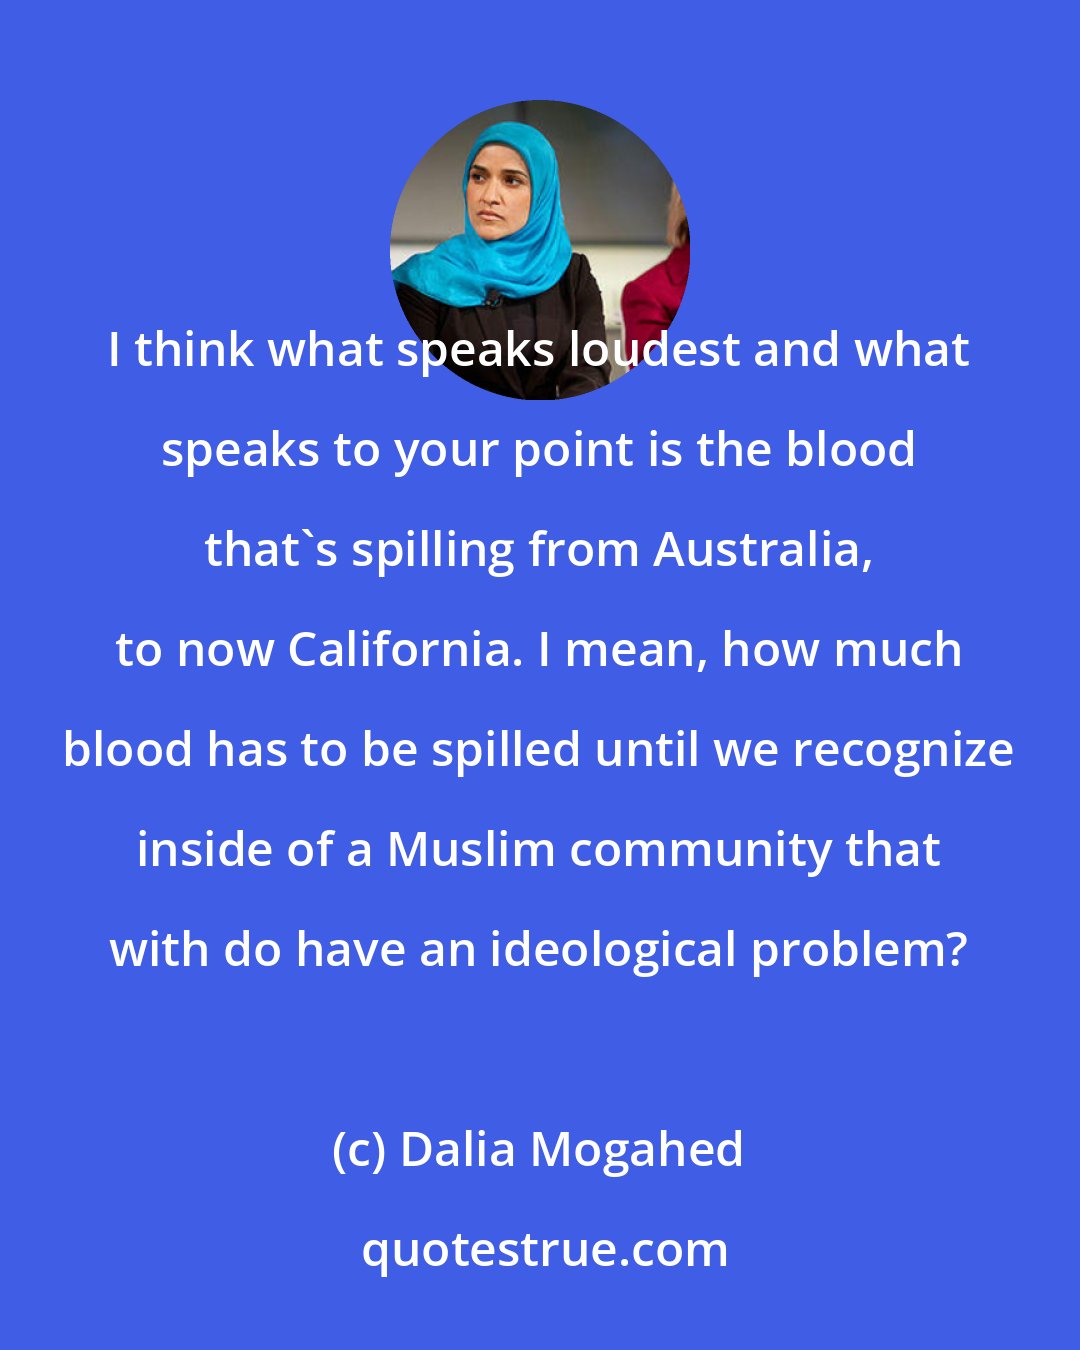 Dalia Mogahed: I think what speaks loudest and what speaks to your point is the blood that's spilling from Australia, to now California. I mean, how much blood has to be spilled until we recognize inside of a Muslim community that with do have an ideological problem?